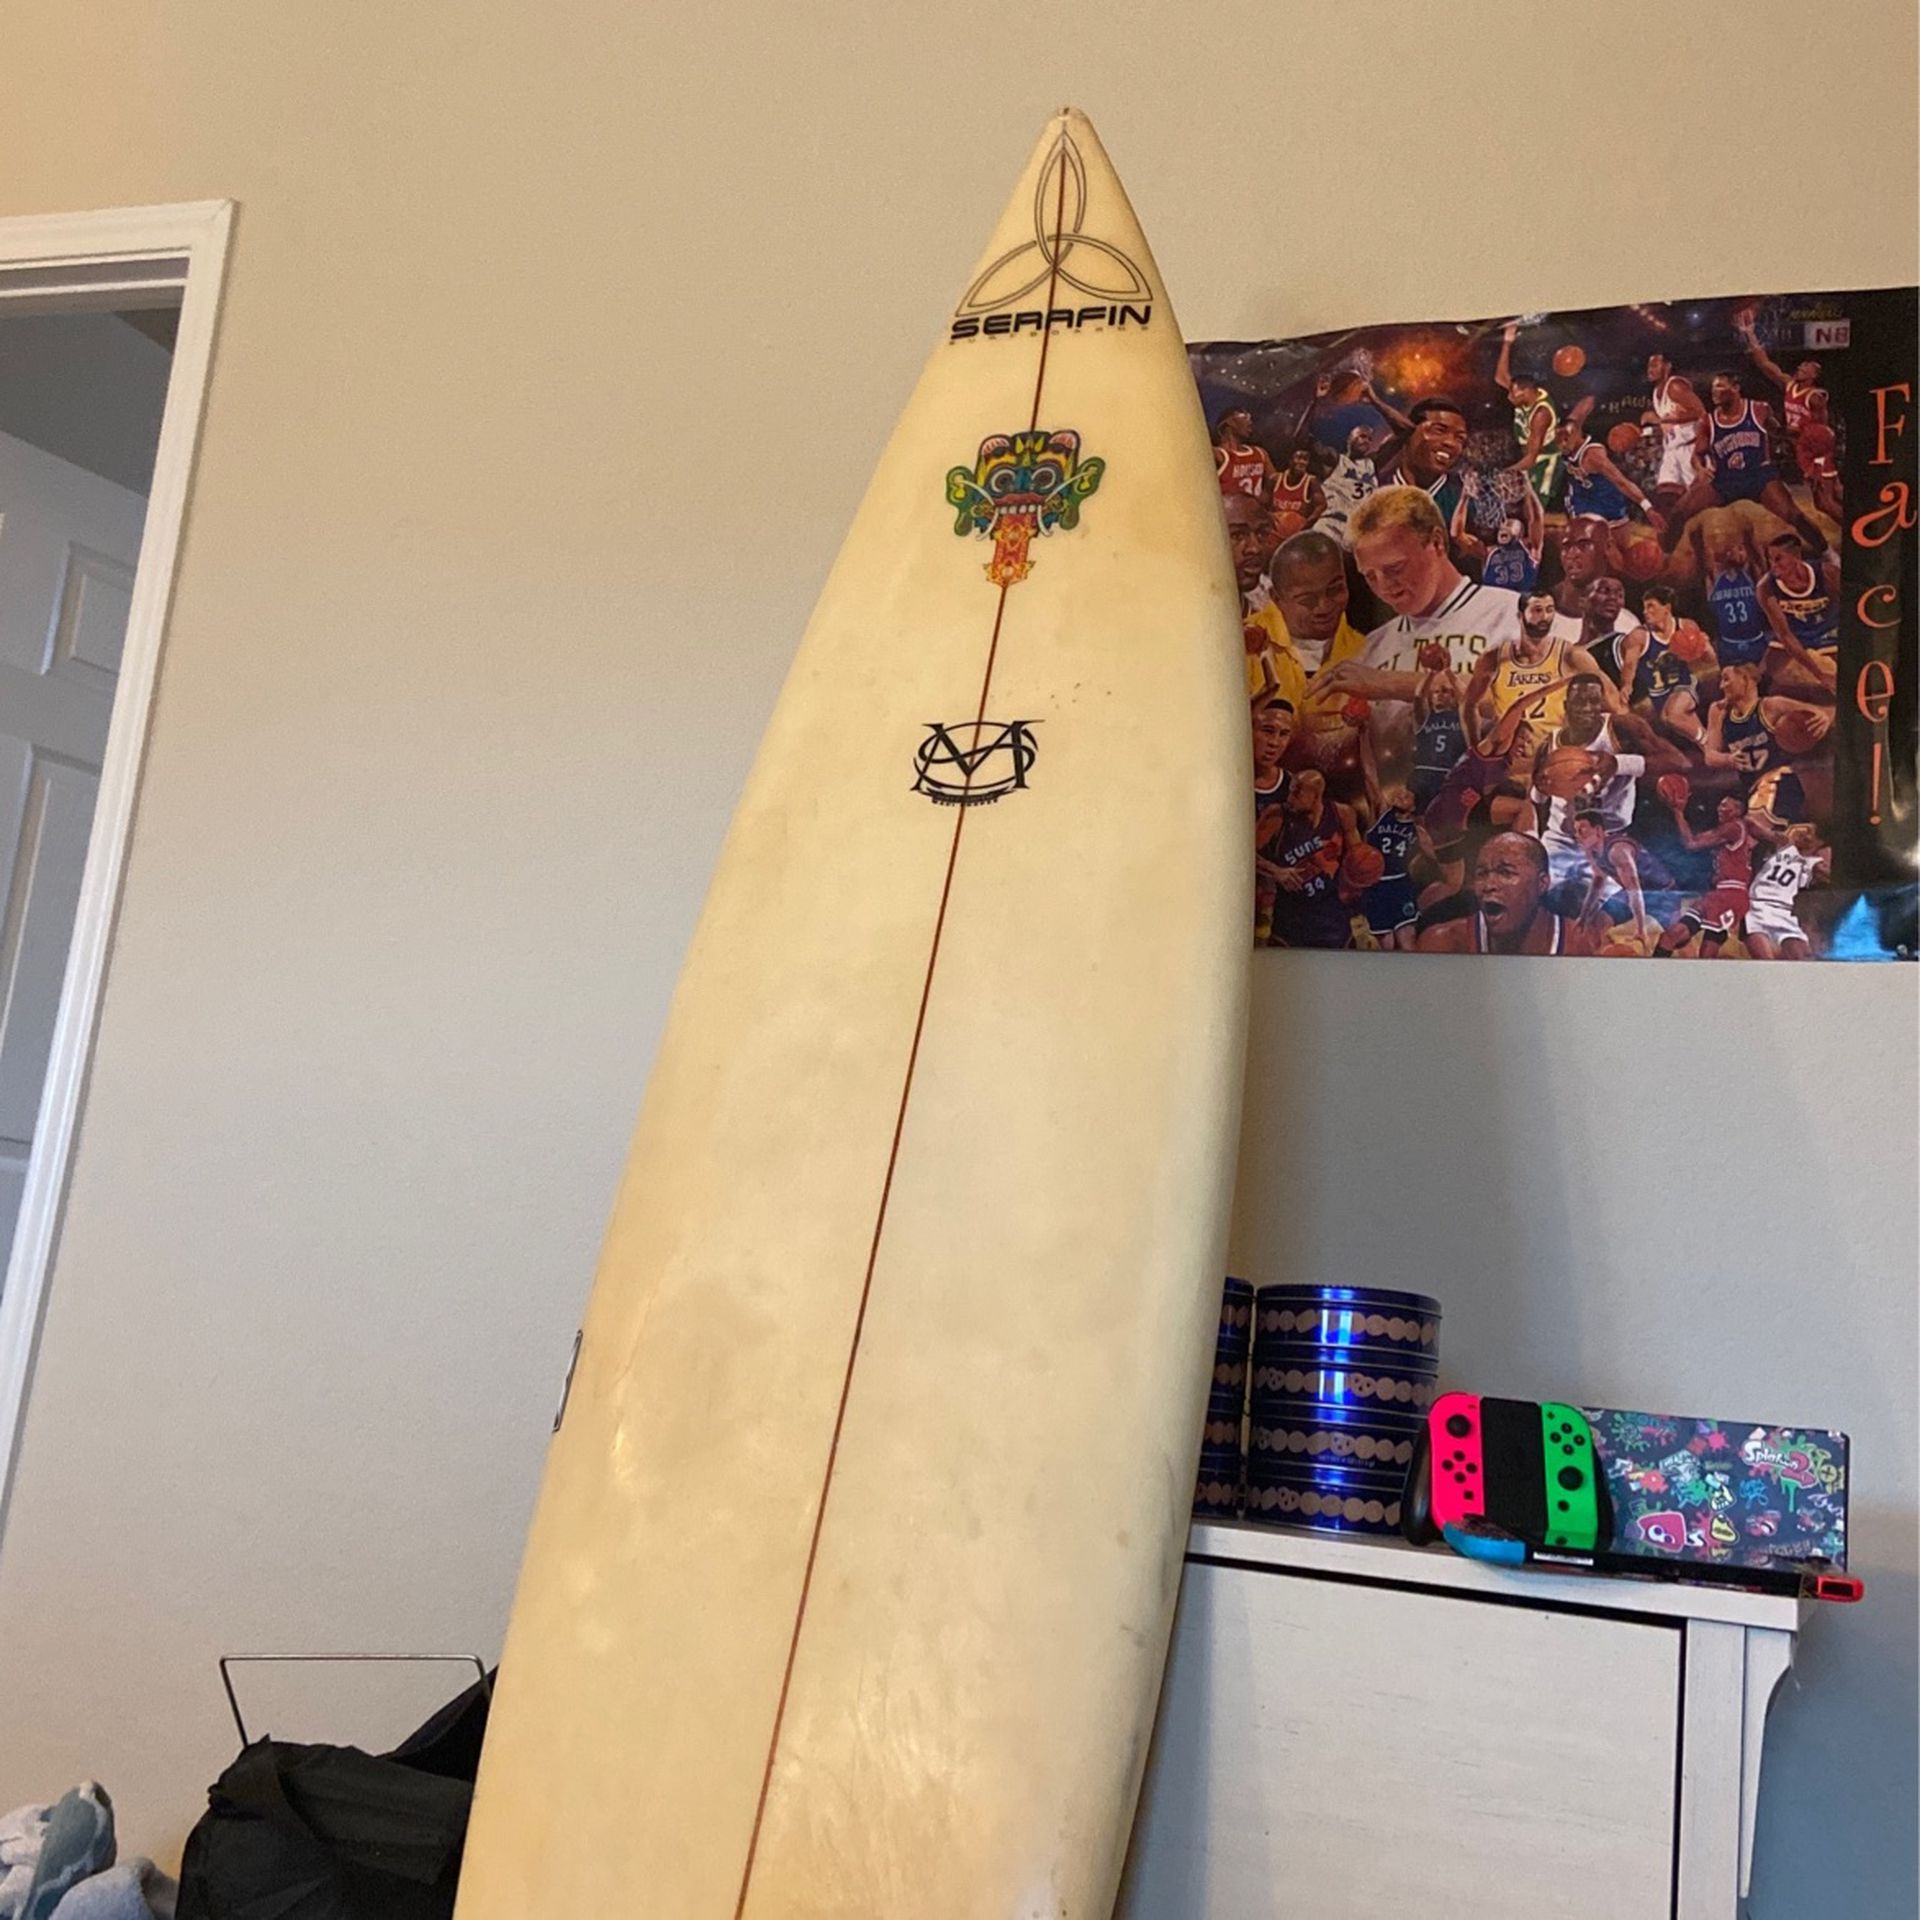 Used Surfboard! Amazing Surfboard that works perfect!